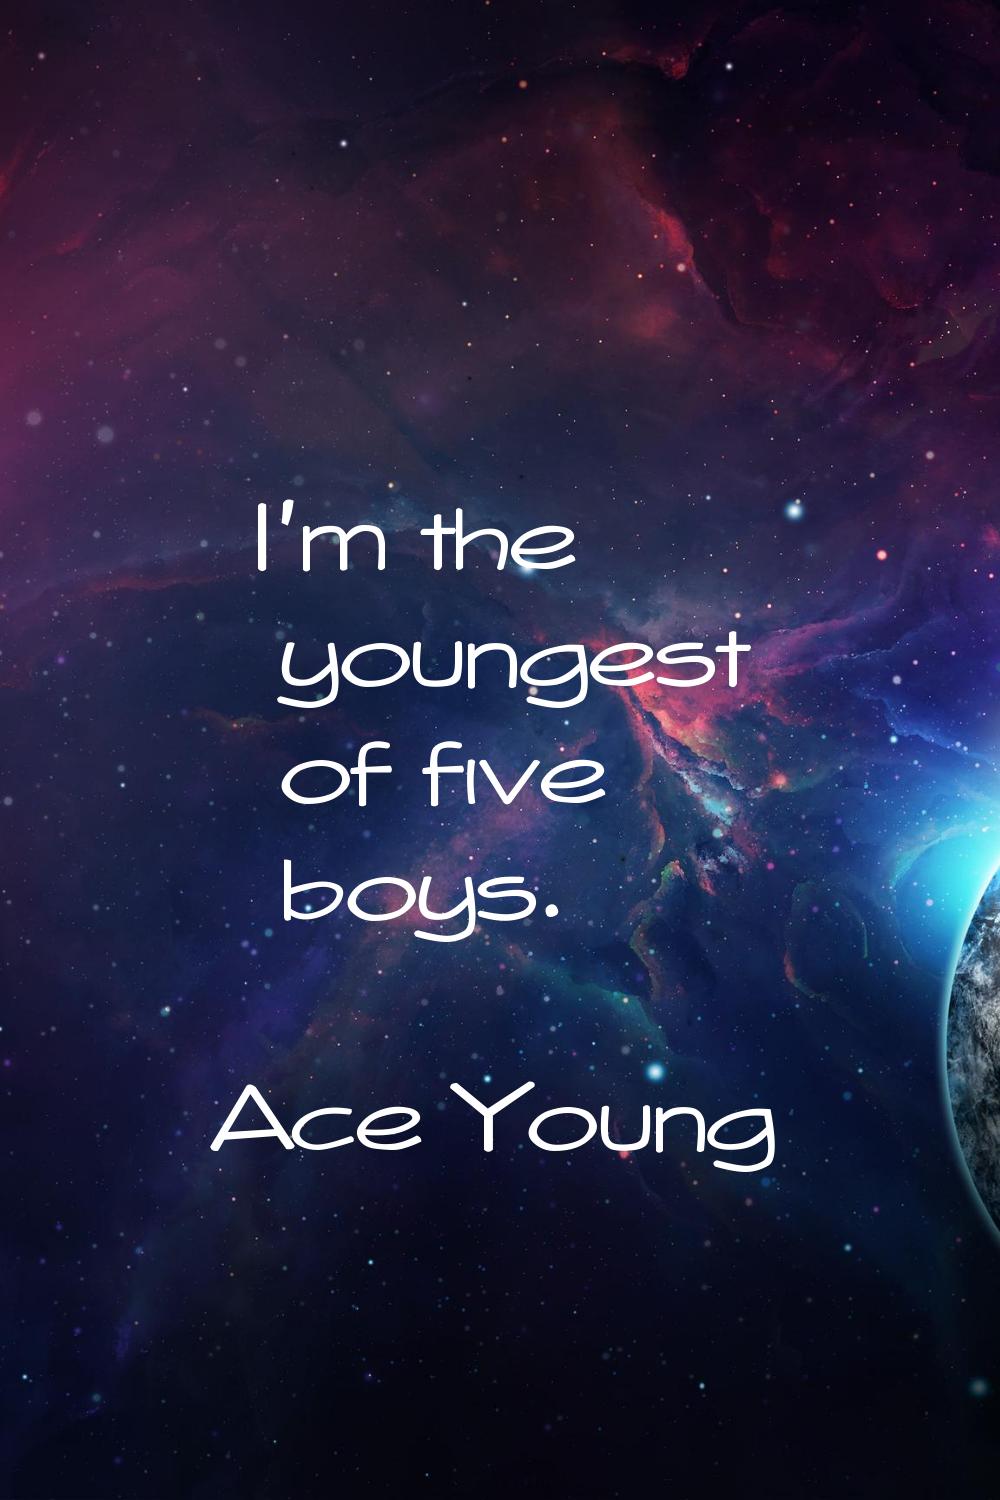 I'm the youngest of five boys.